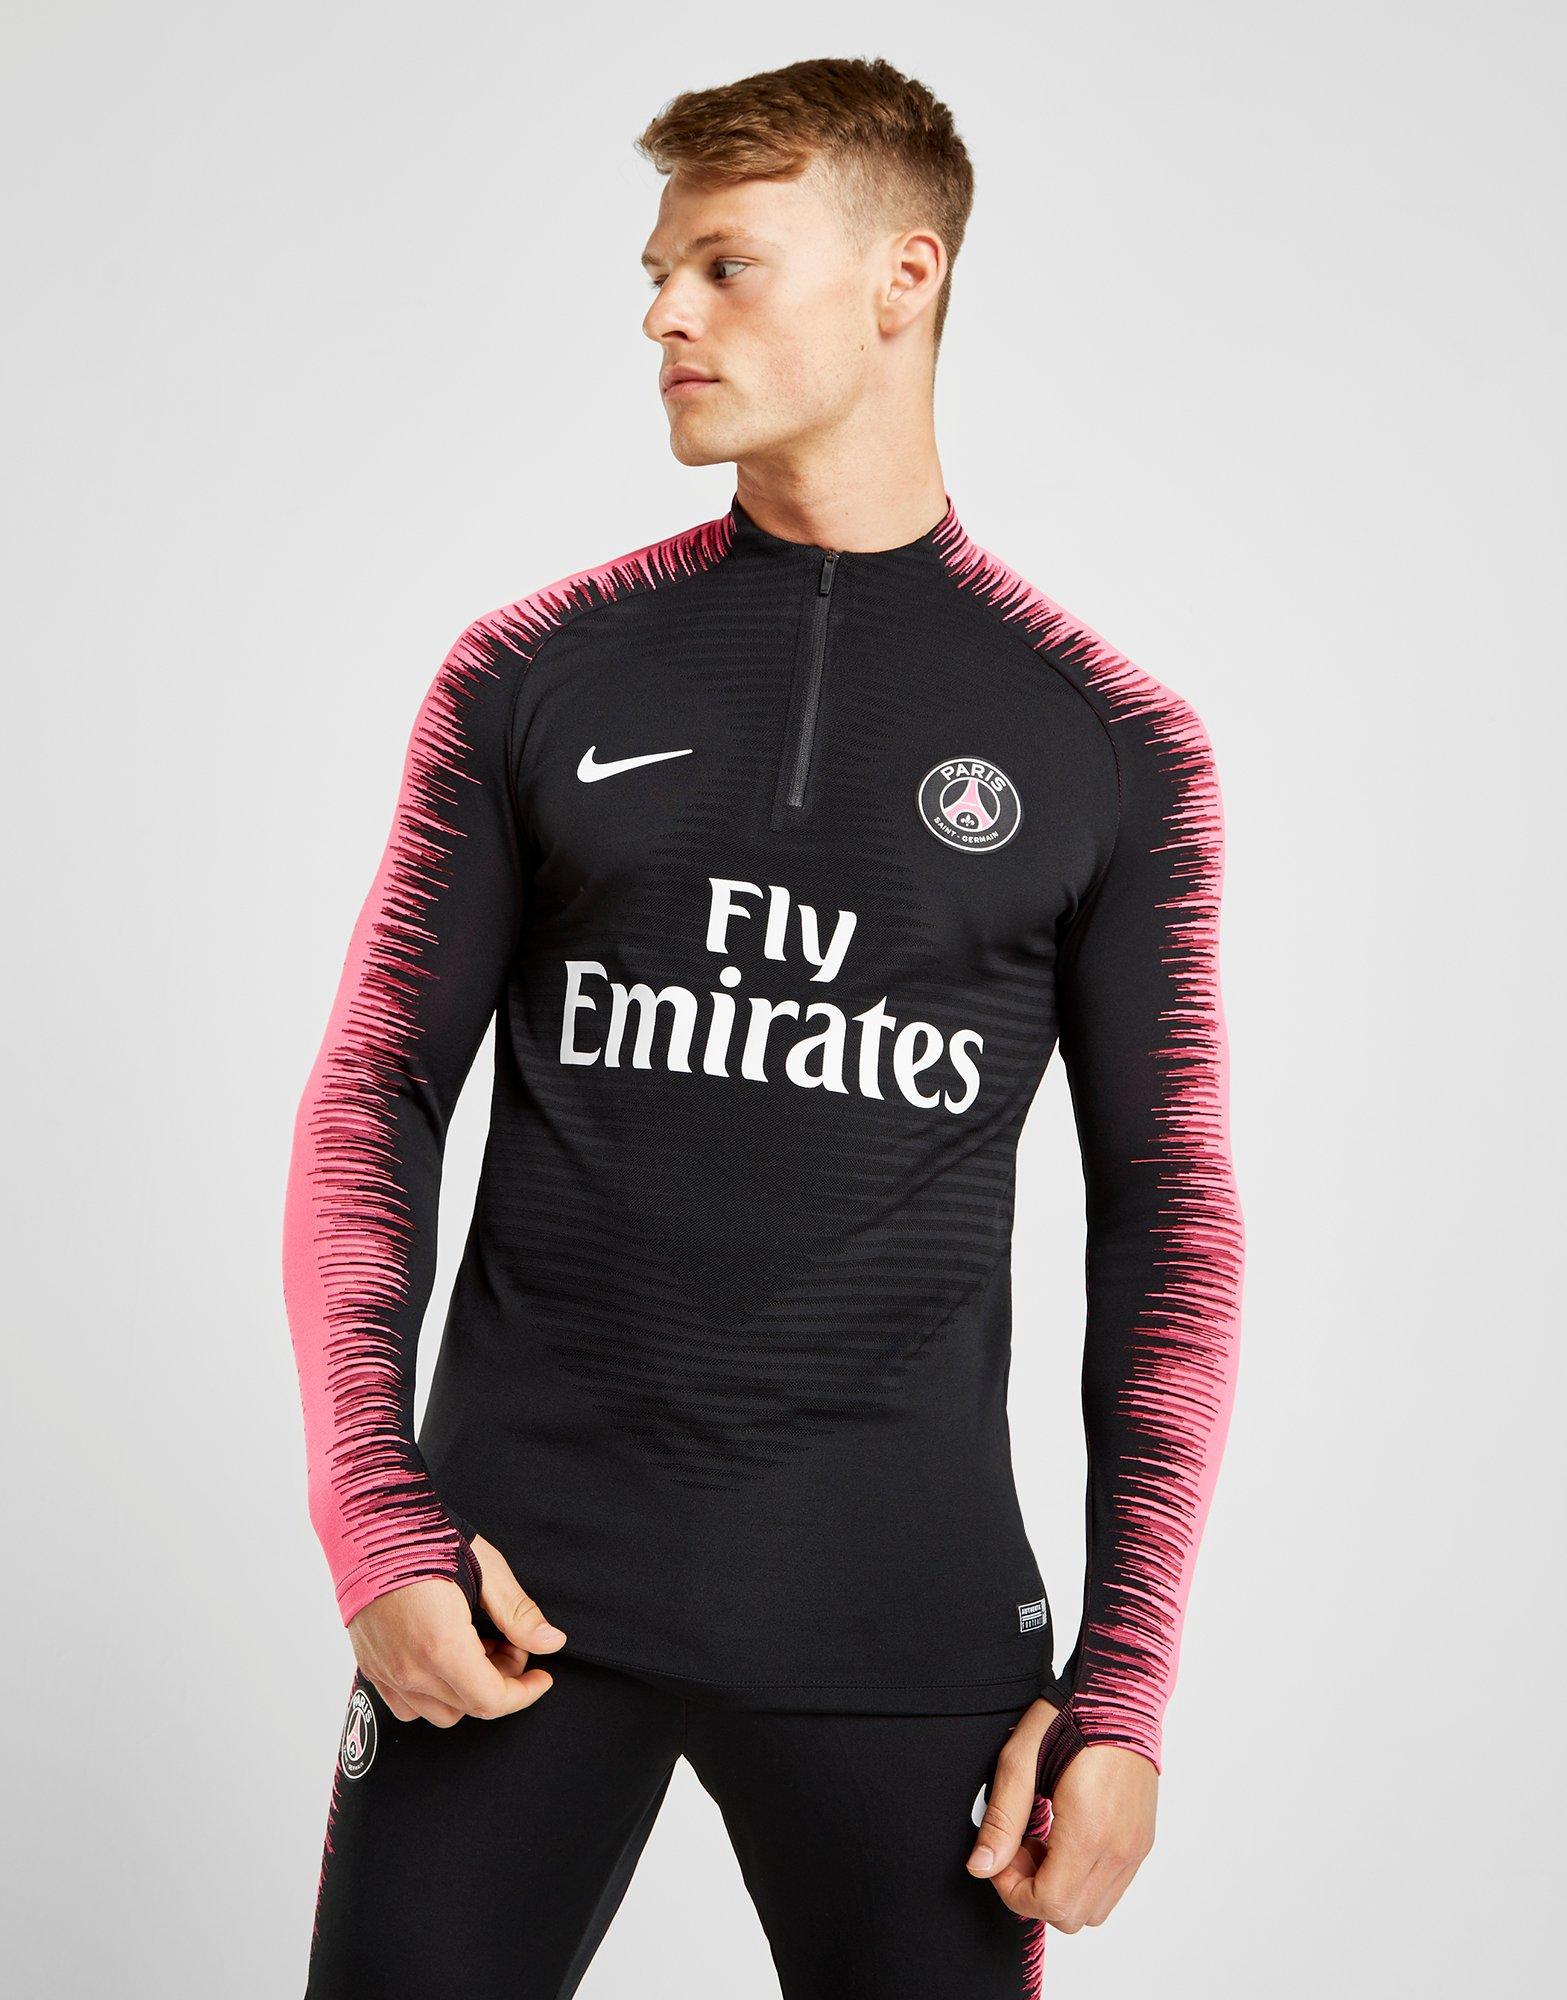 psg black and pink,New daily offers,olkoglobal.com